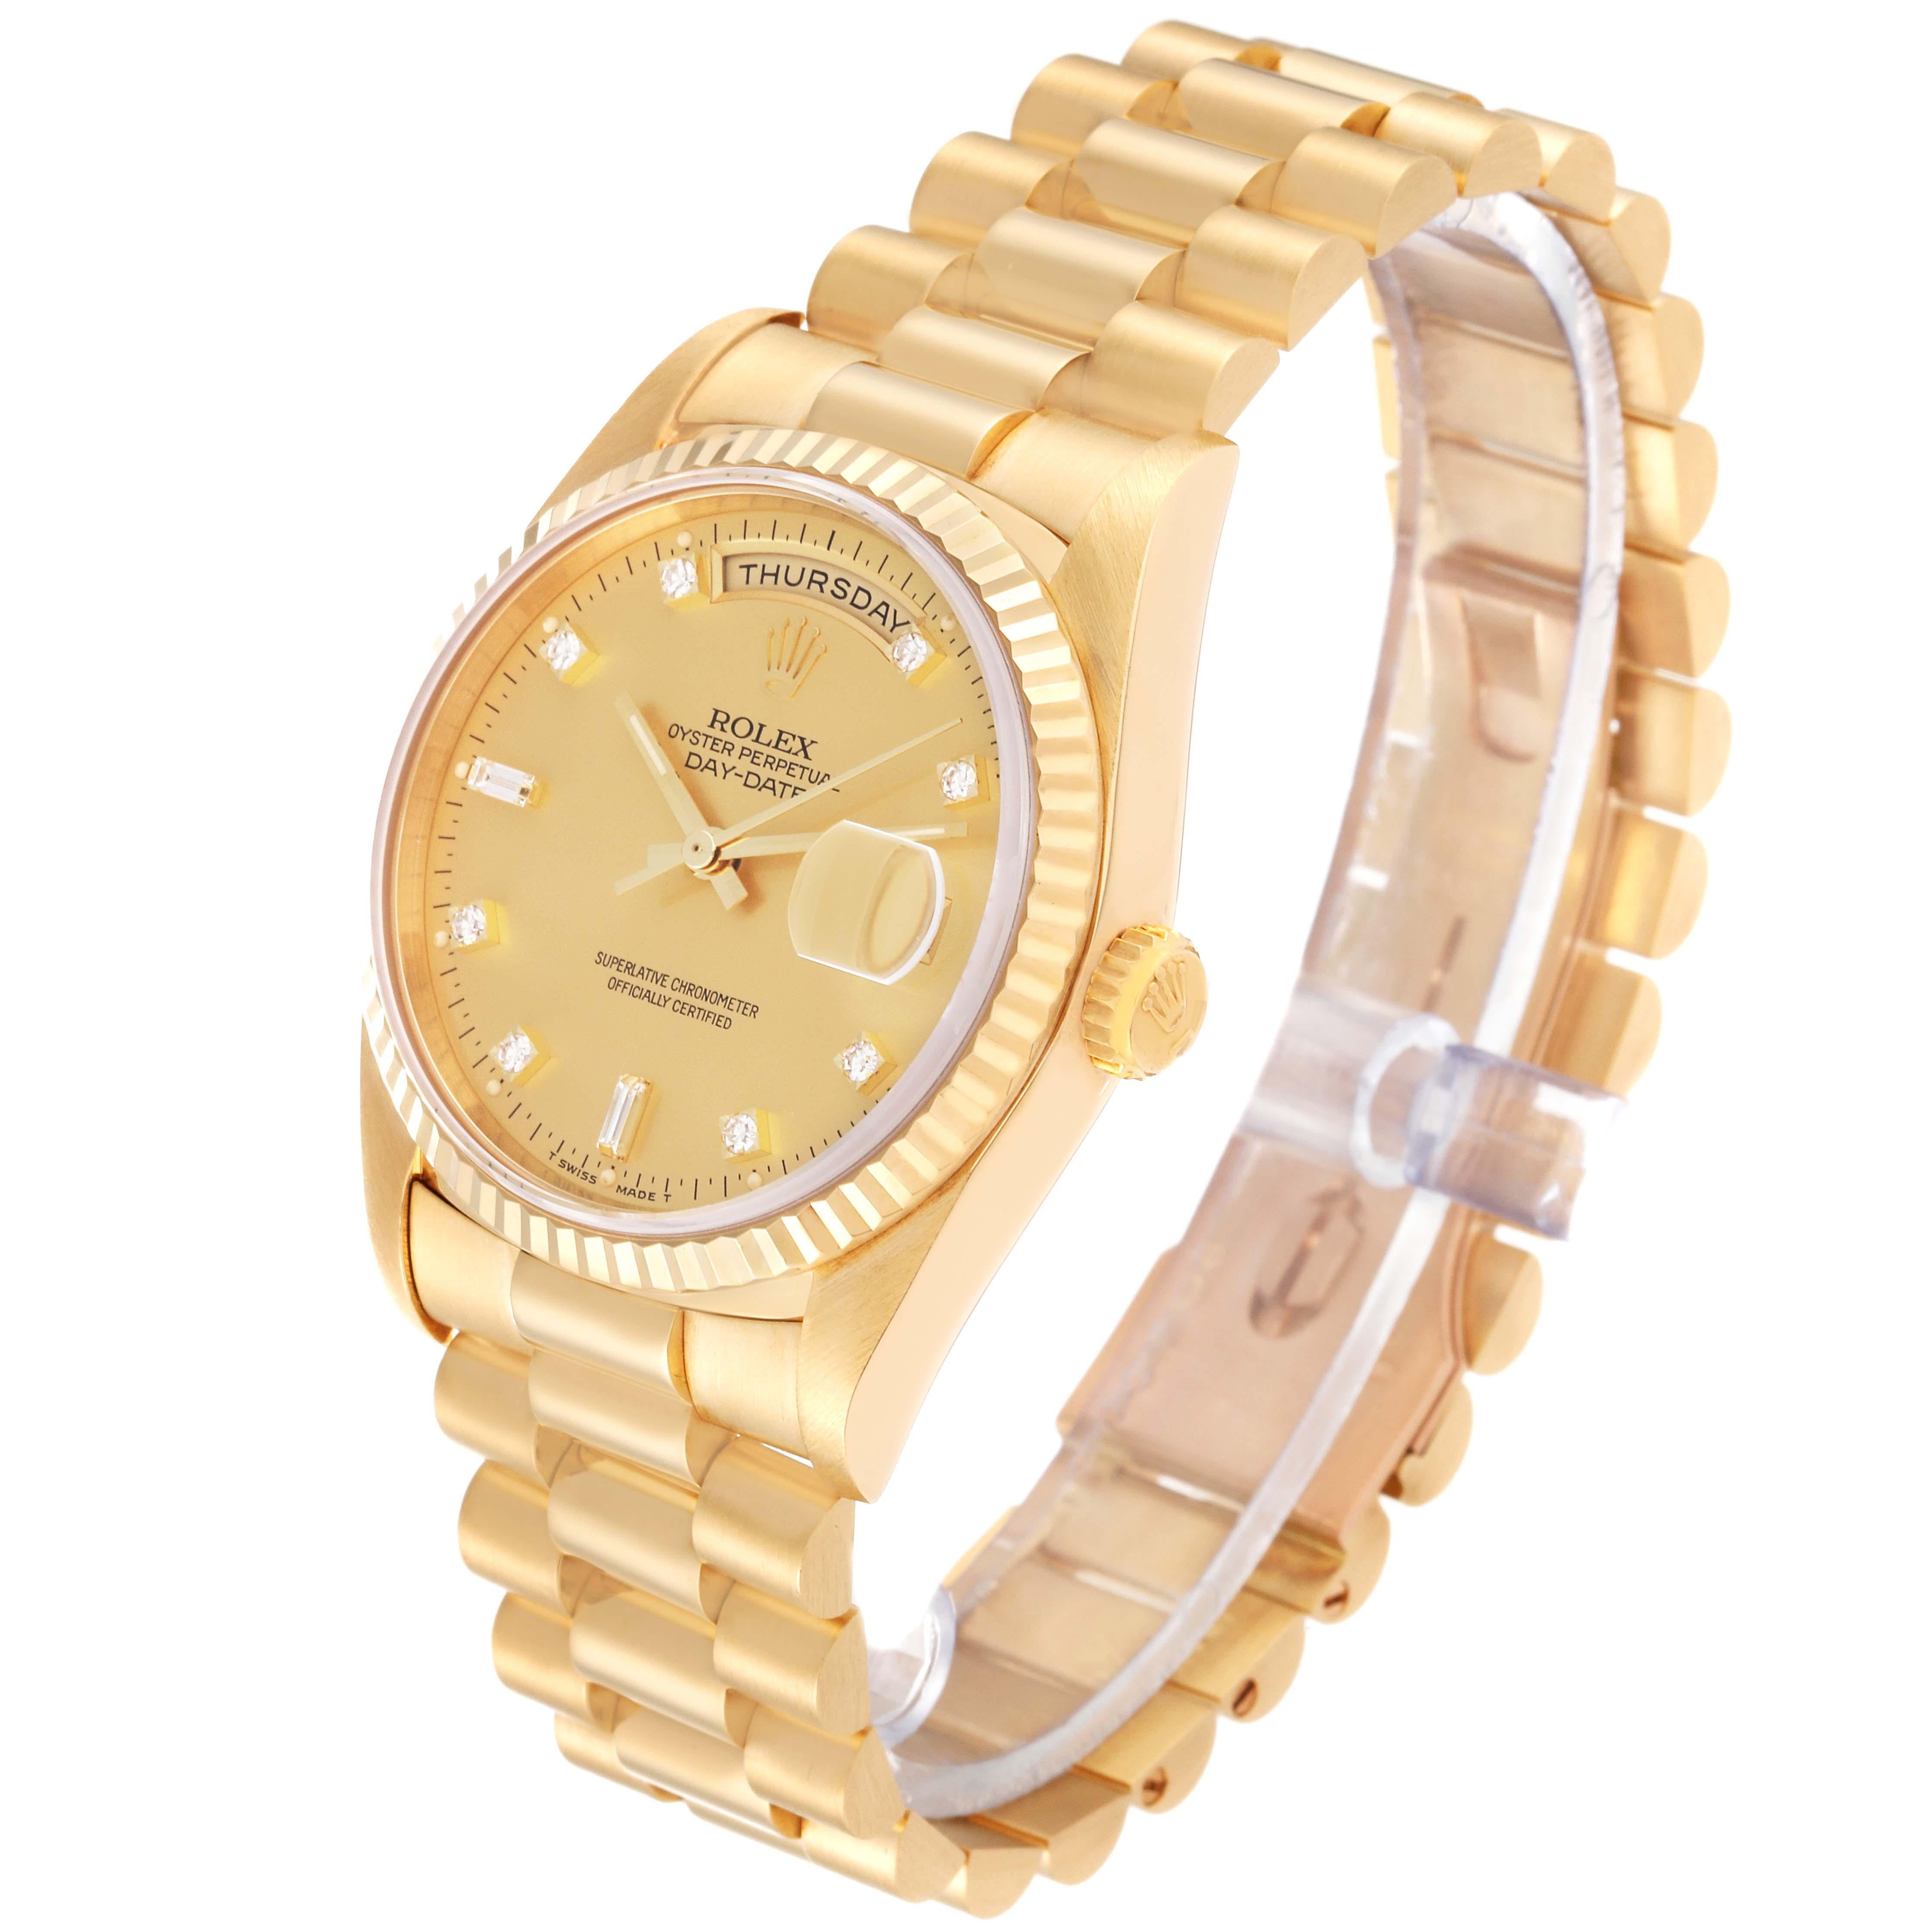 Rolex President Day-Date Yellow Gold Champagne Diamond Dial Mens Watch 18238 4